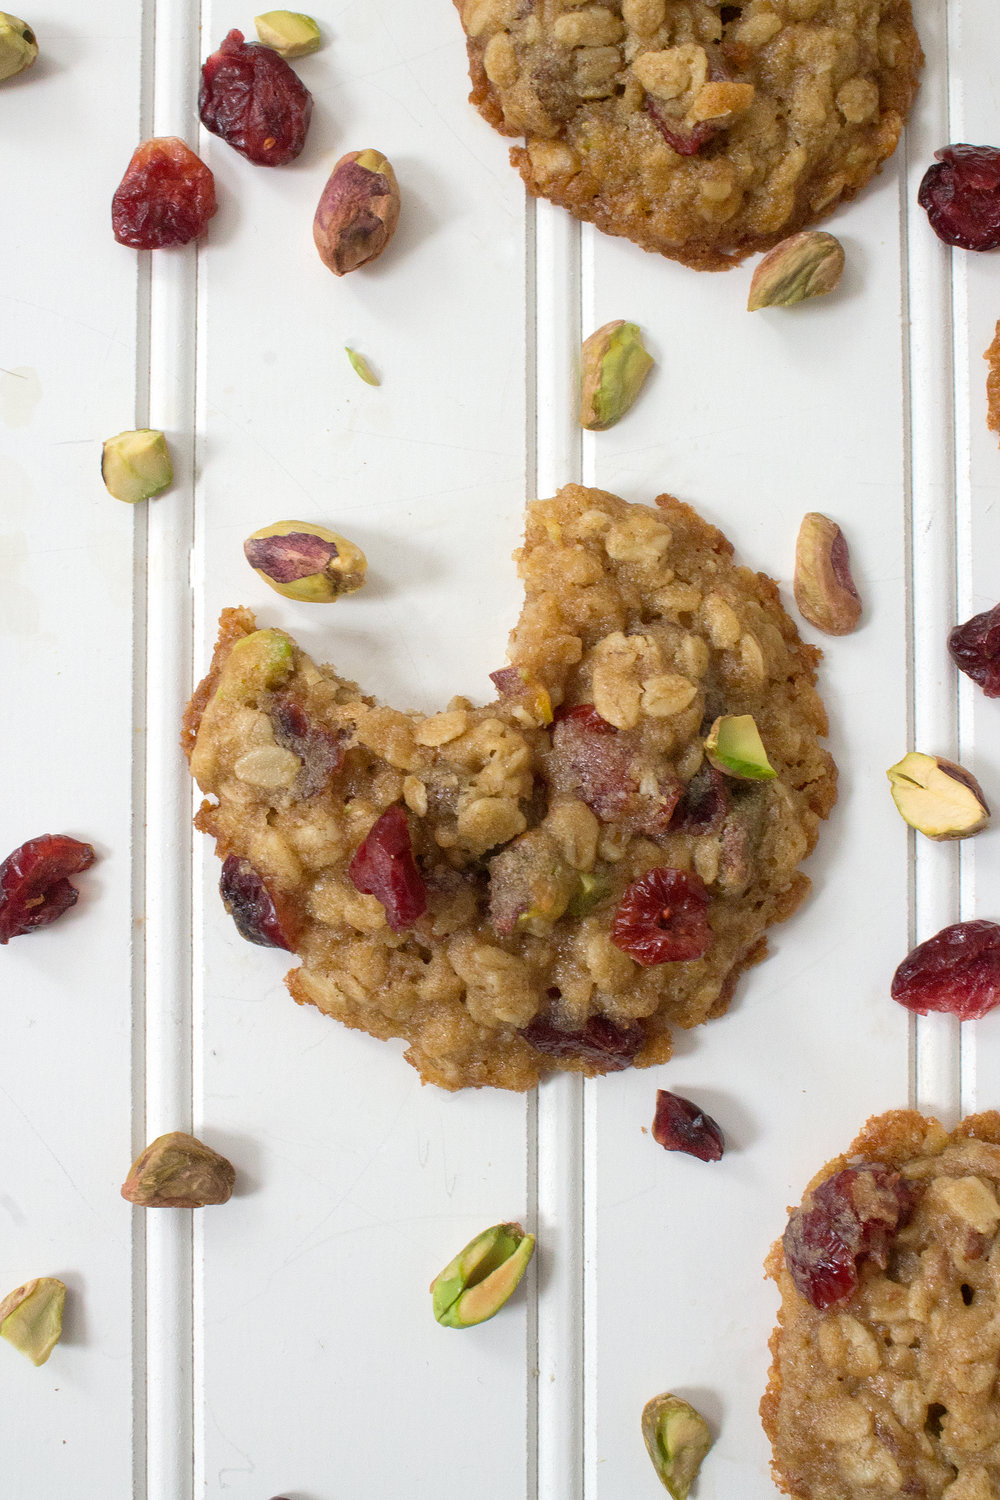 Grab the recipe for these Oatmeal Cookies packed with pistachios and cranberries. Recipe from UnusuallyLovely.com